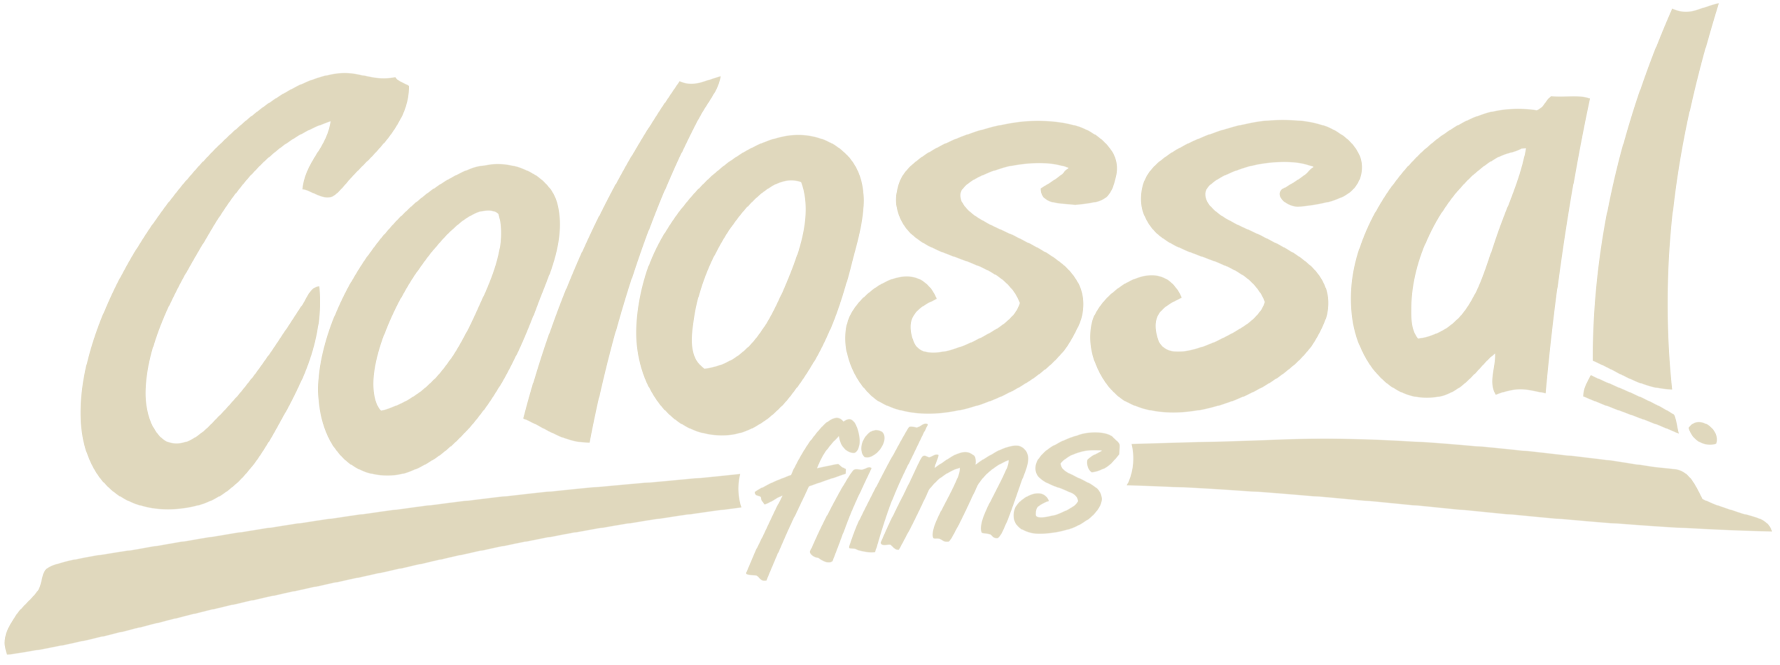 Colossal Films